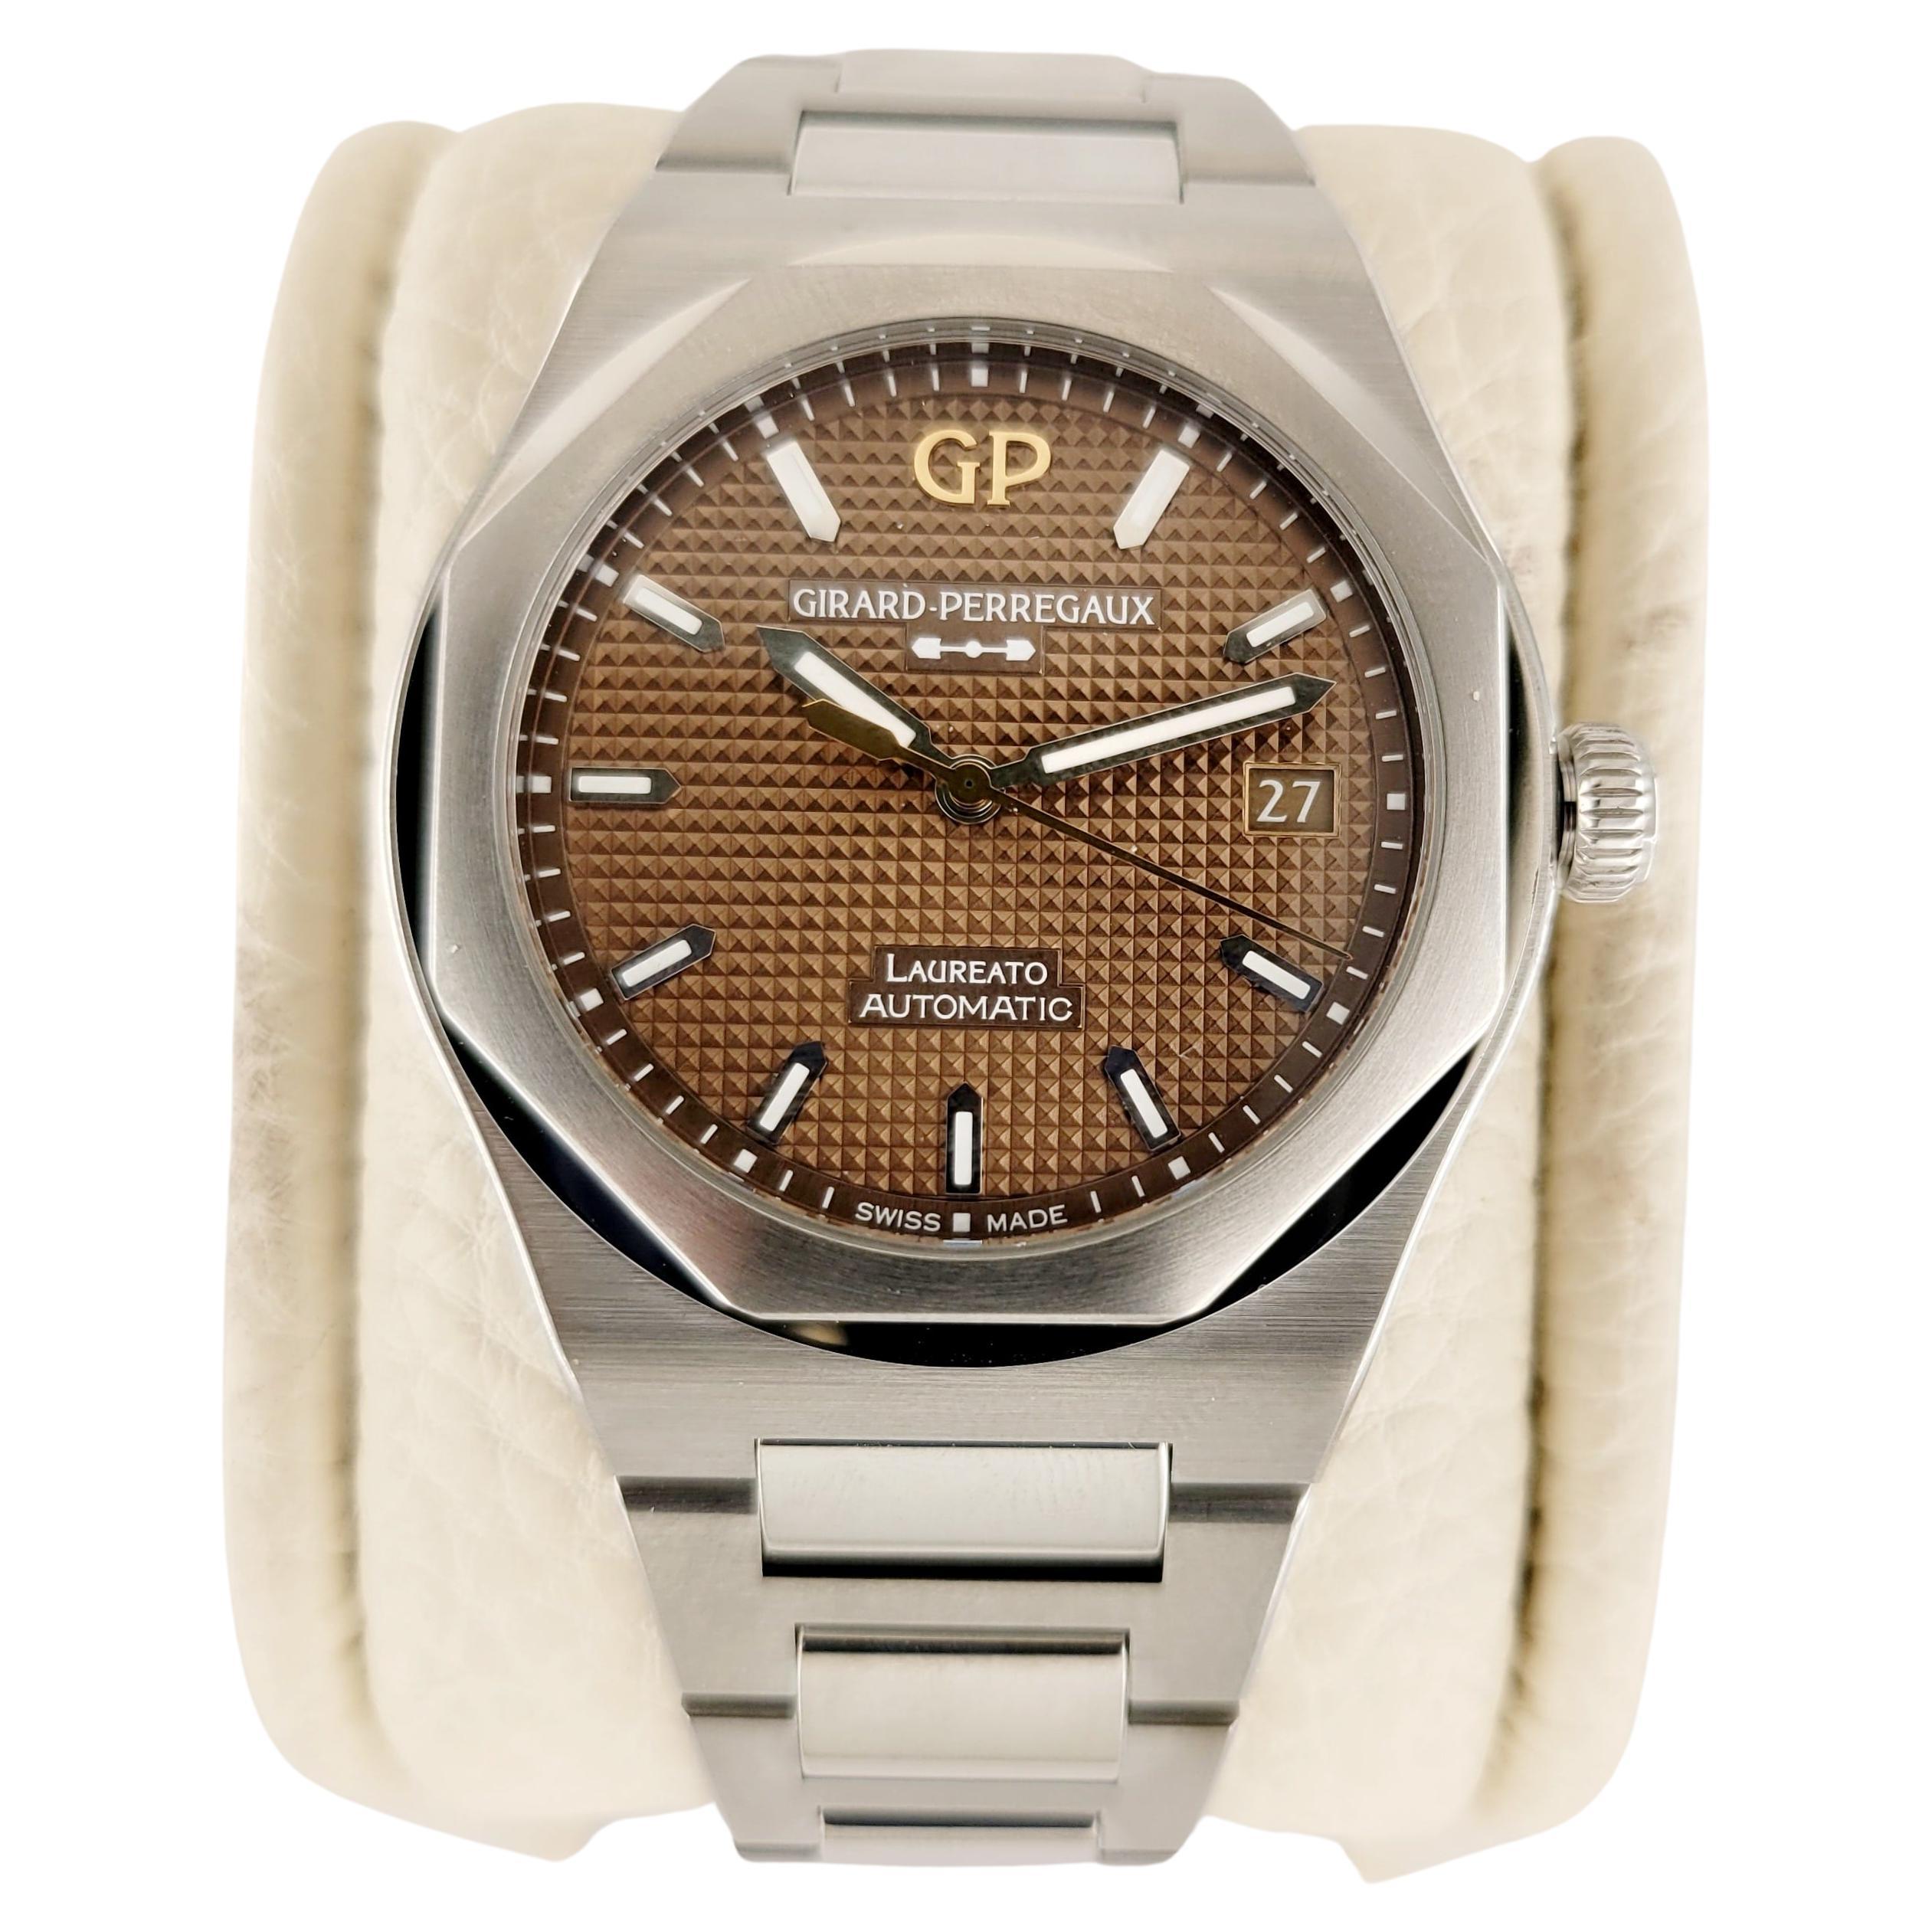 Reference Number 81005-11-3154-1CM
Brand Girard Perregaux
Model LAUREATO 38 MM
Case material :Stainless steel
Diameter :38 mm
Thickness :10 mm
Case-back :sapphire crystal
Dial :Sunray copper-Coloured with a Clous de Paris pattern
Water resistance